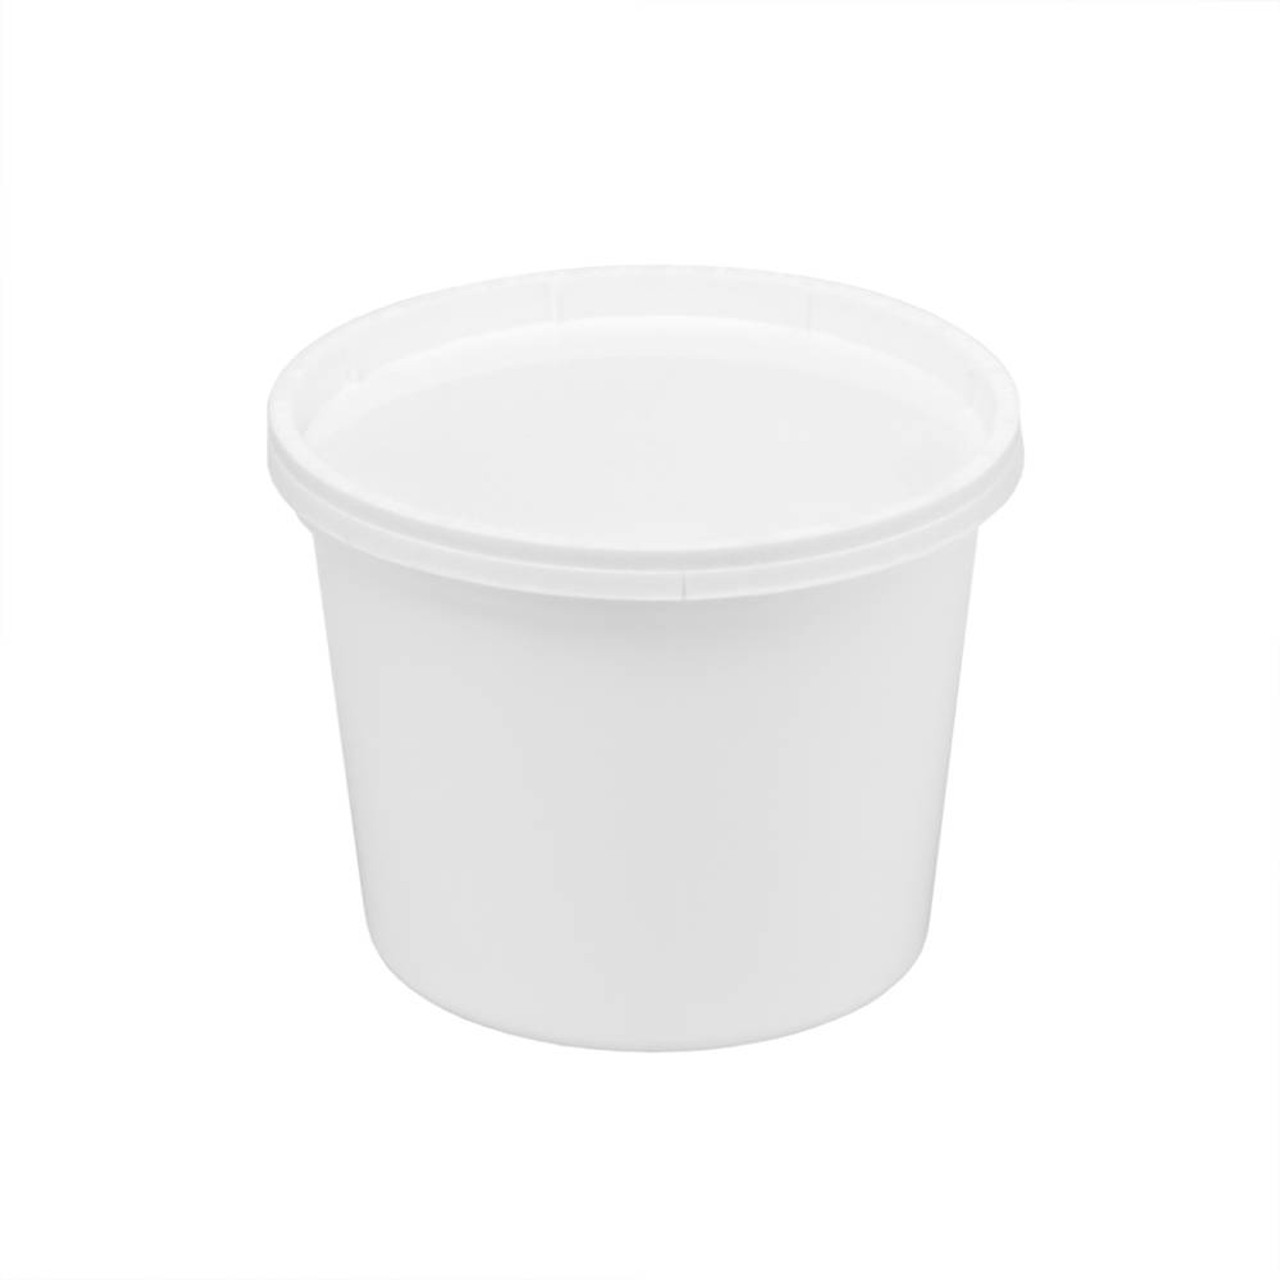 32 oz Ice Cream/Soup Quart Containers w/ Lids included | 250 count